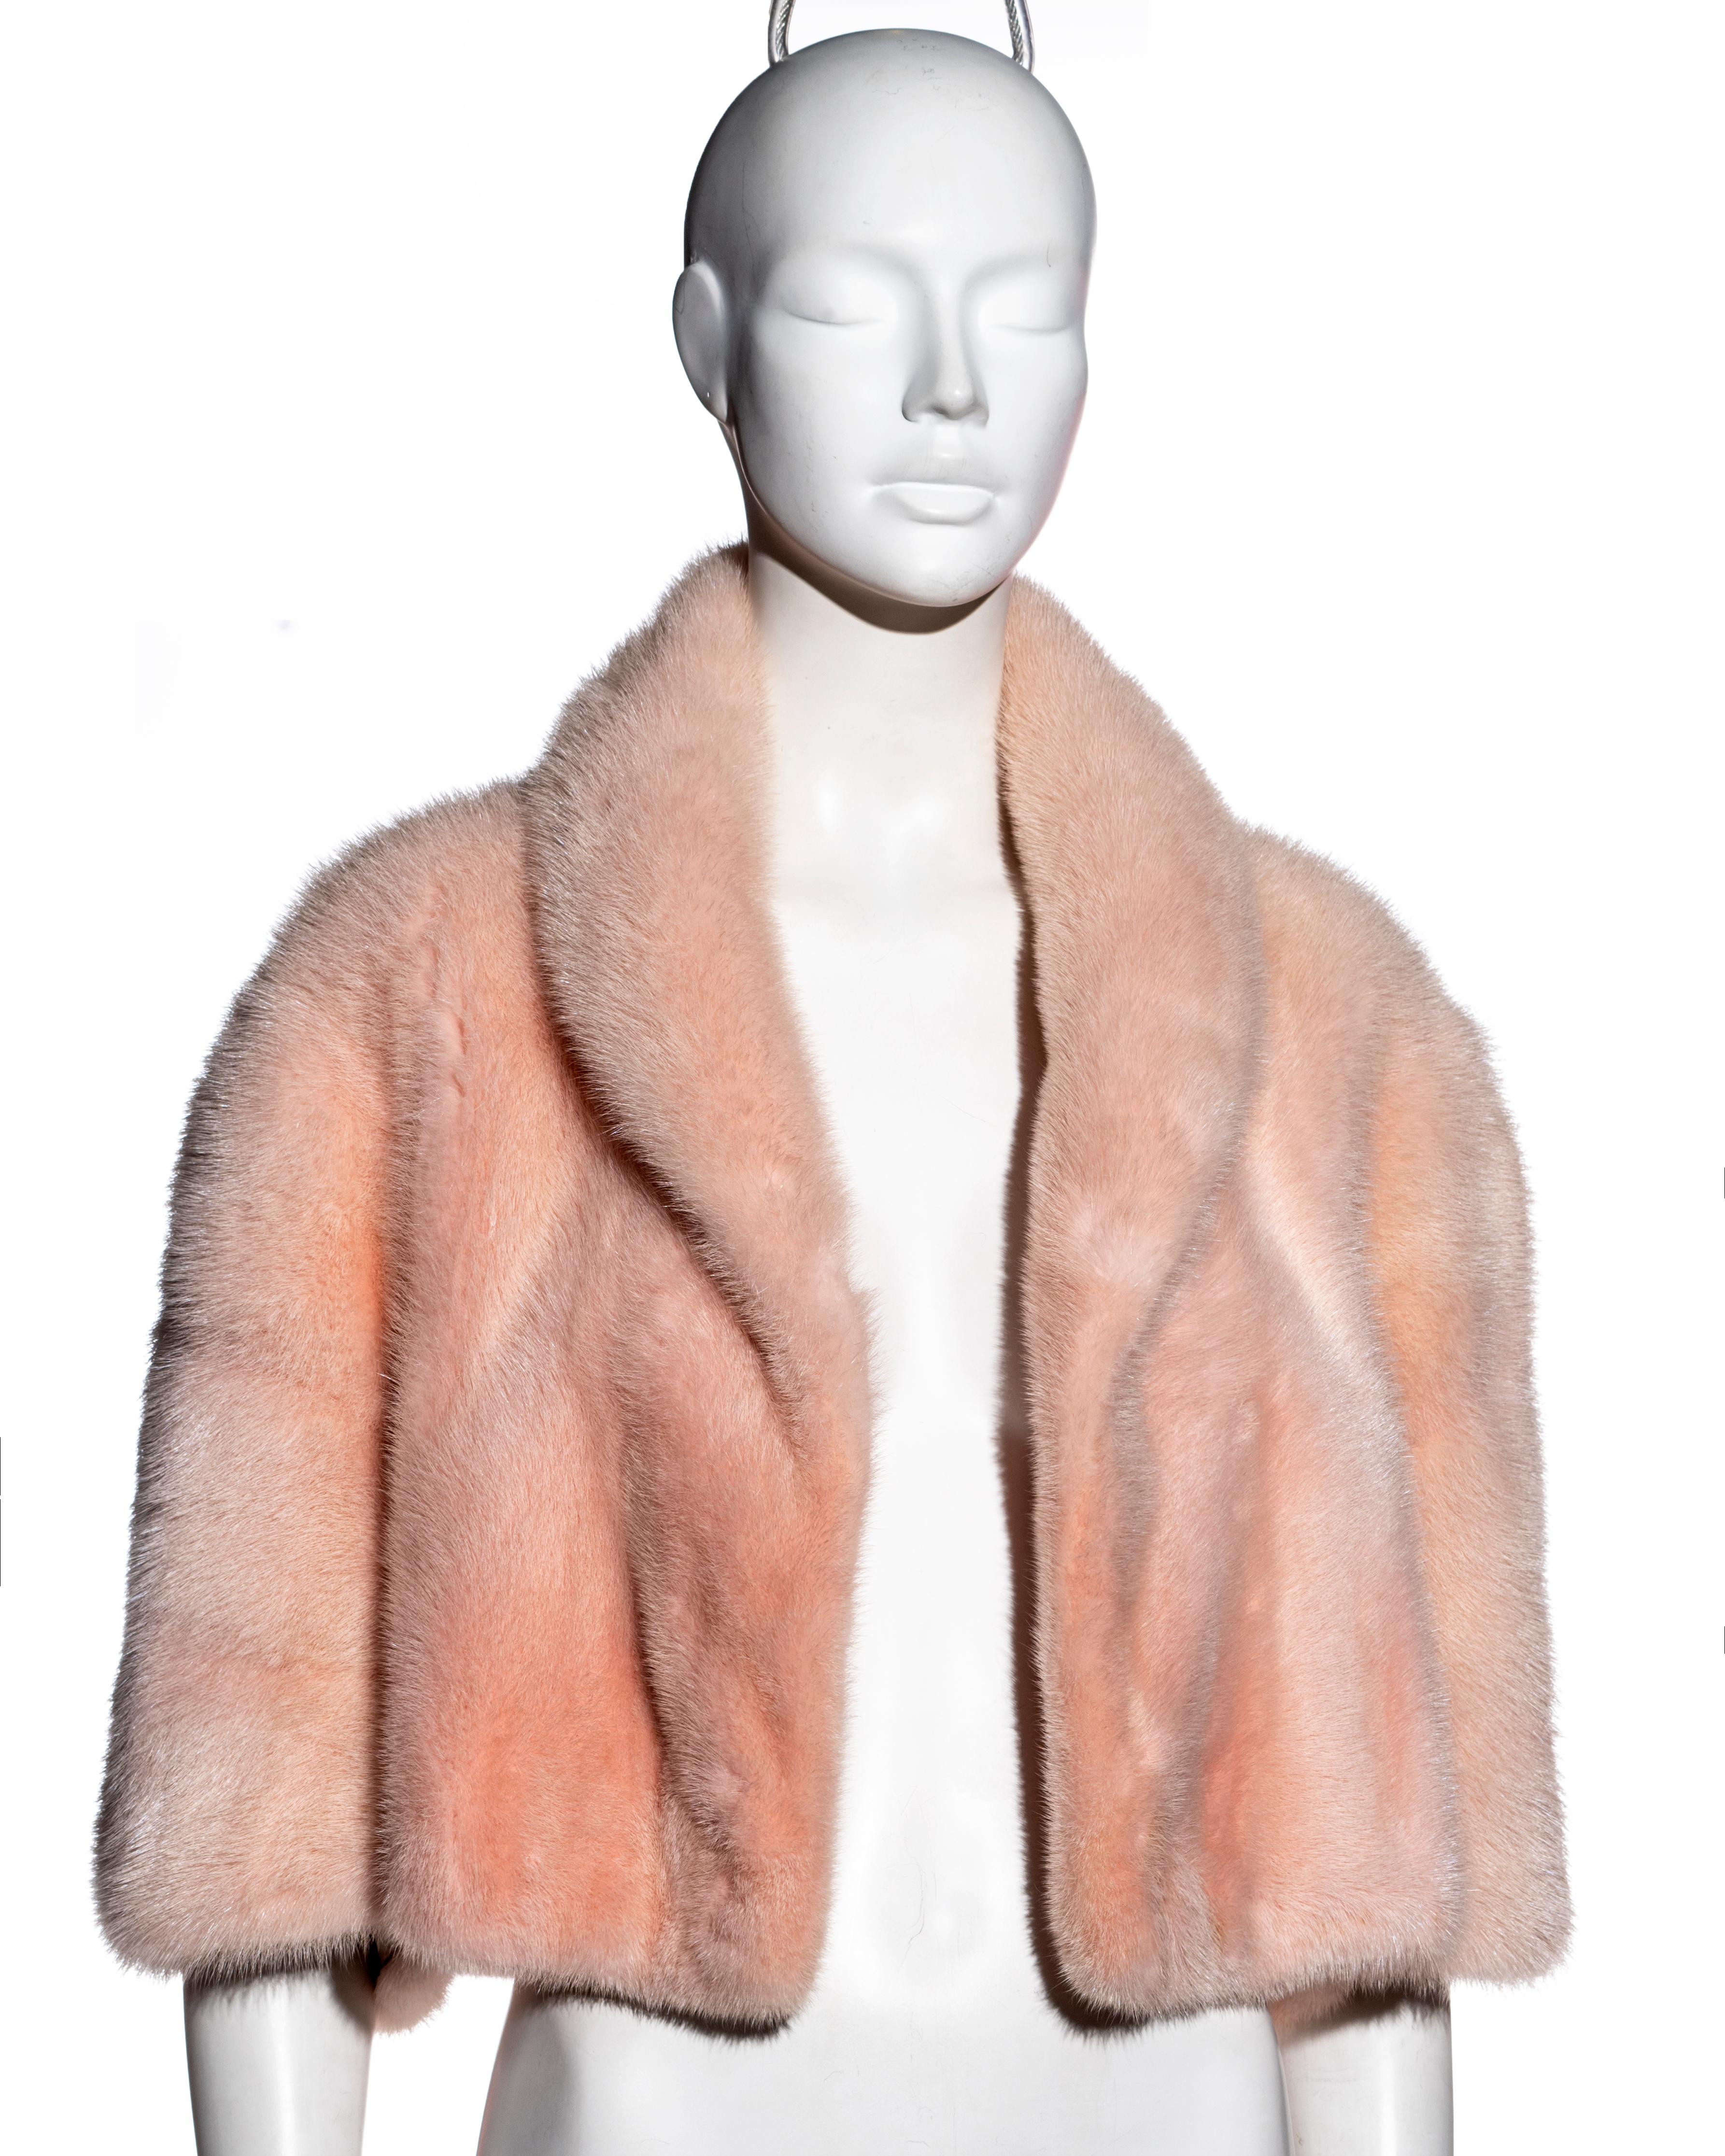 ▪ Christian Dior pink mink fur cropped bolero jacket
▪ Designed by John Galliano 
▪ Shawl lapel 
▪ Wide cropped sleeves appearing as a cape from the back 
▪ Silk lining with embroidered 'CD' 
▪ Open front 
▪ Size Medium
▪ Fall-Winter 1997
▪ 100%